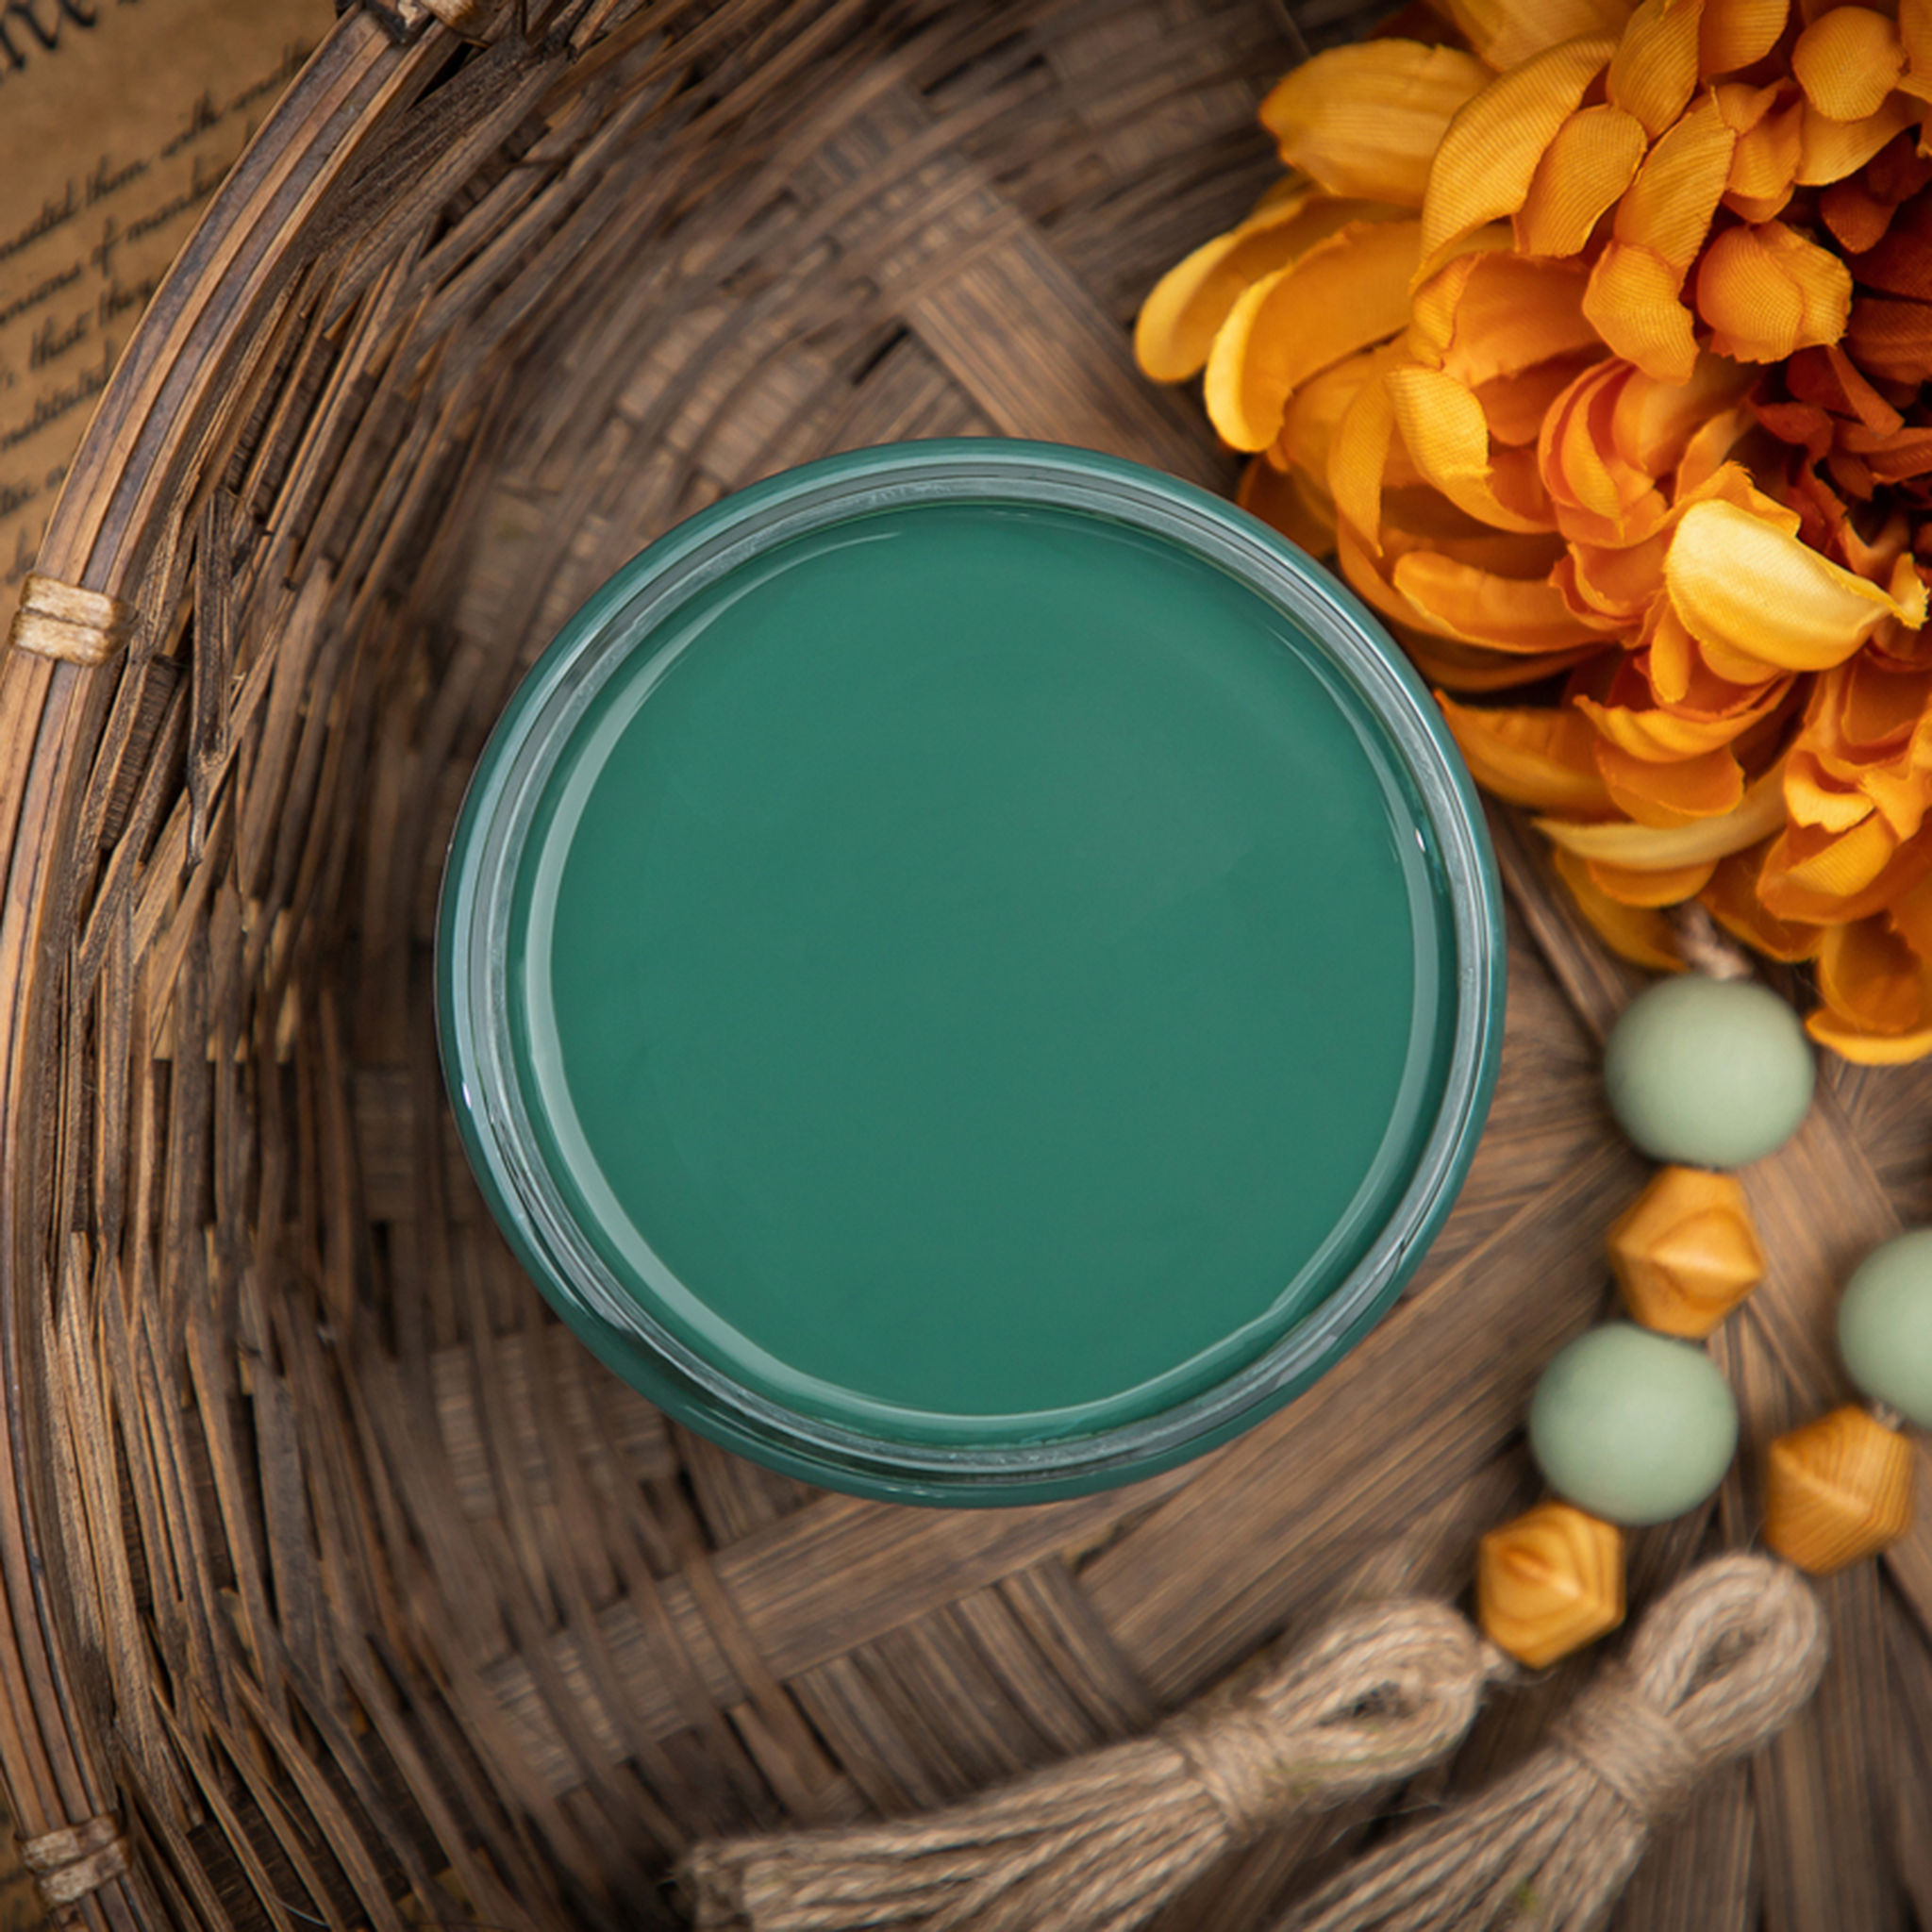 An arial view of an open container of Dixie Belle Paint Company’s Palmetto Chalk Mineral Paint is in a wicker basket with an large orange silk flower with wood beads and twine tassles.